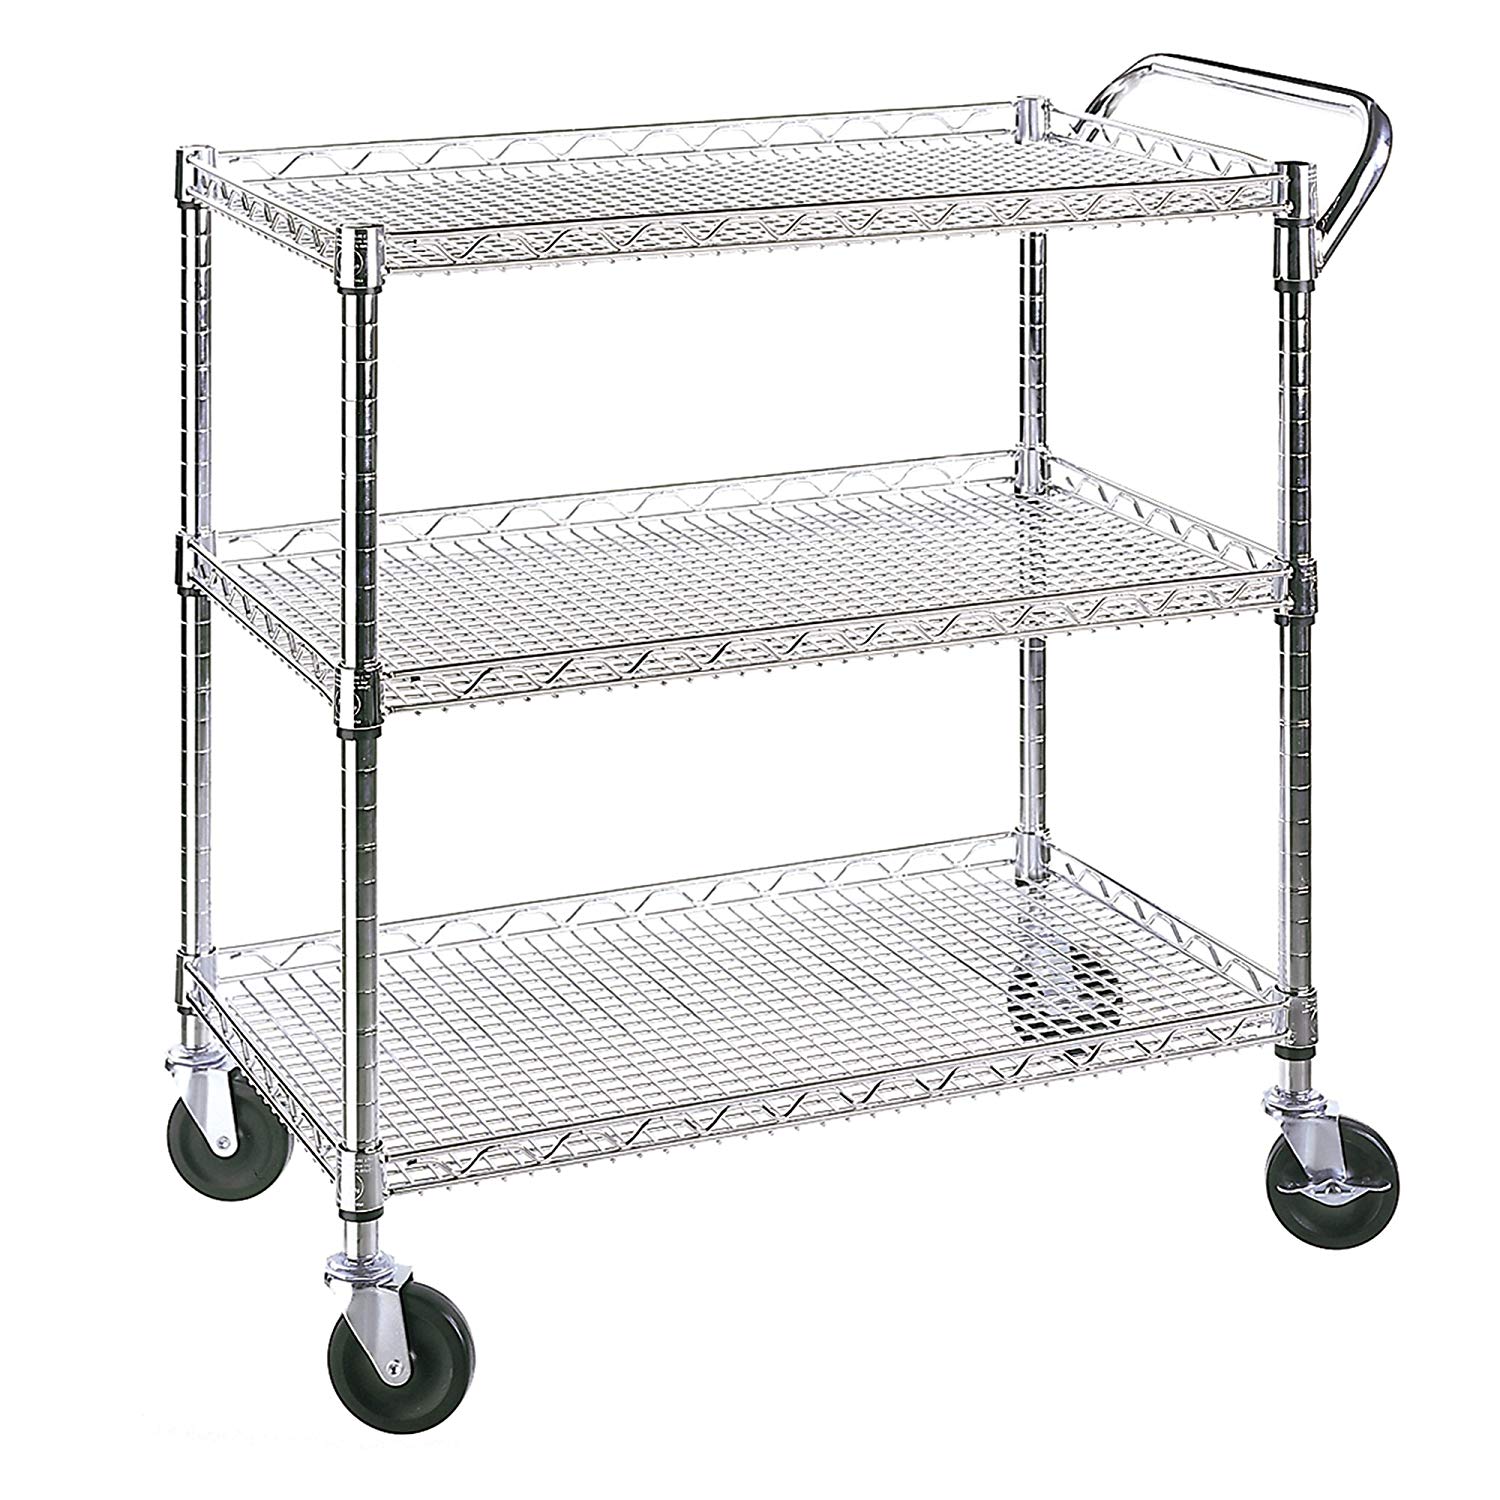 FDW Heavy Duty Utility Cart Wire 3 Tier Rolling Cart Organizer NSF/ Kitchen/ Cart on Wheels Metal Microwave Cart Large with Wire Shelving and Microwave Table Heavy Duty Commercial Grade,Wood//Chrome